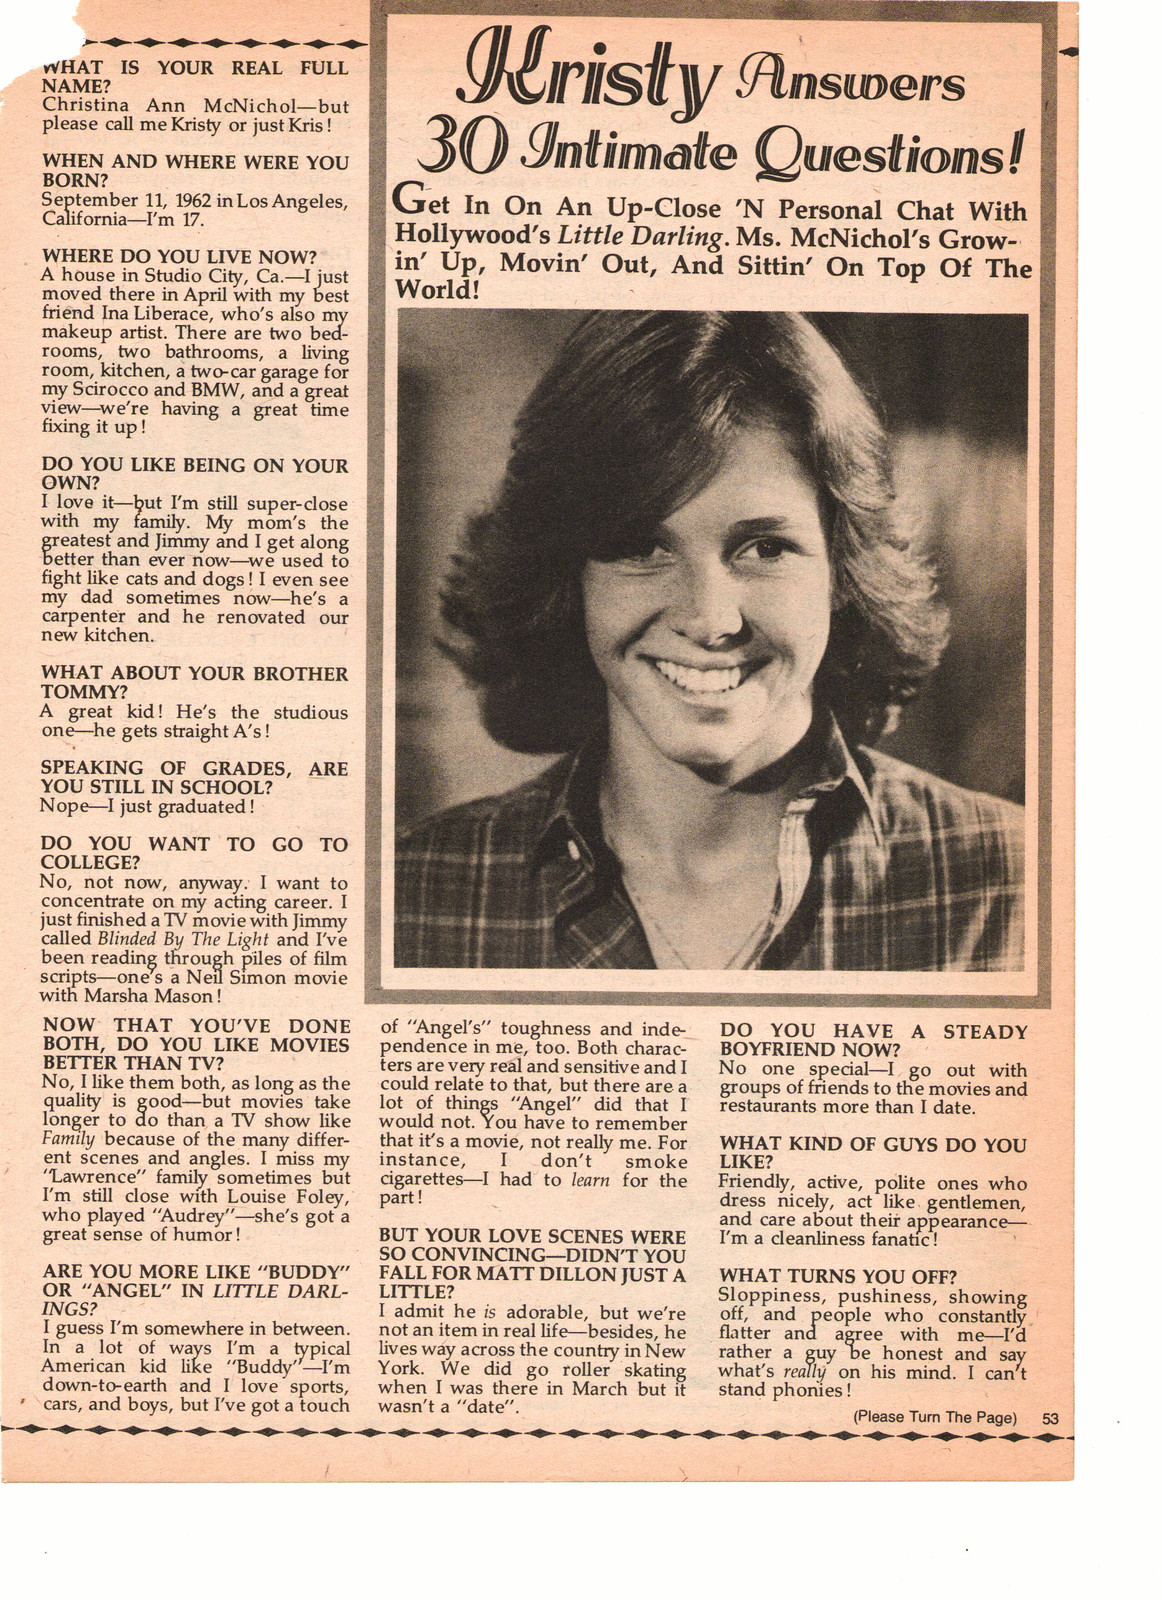 Kristy McNichol, Full Page Vintage Clipping